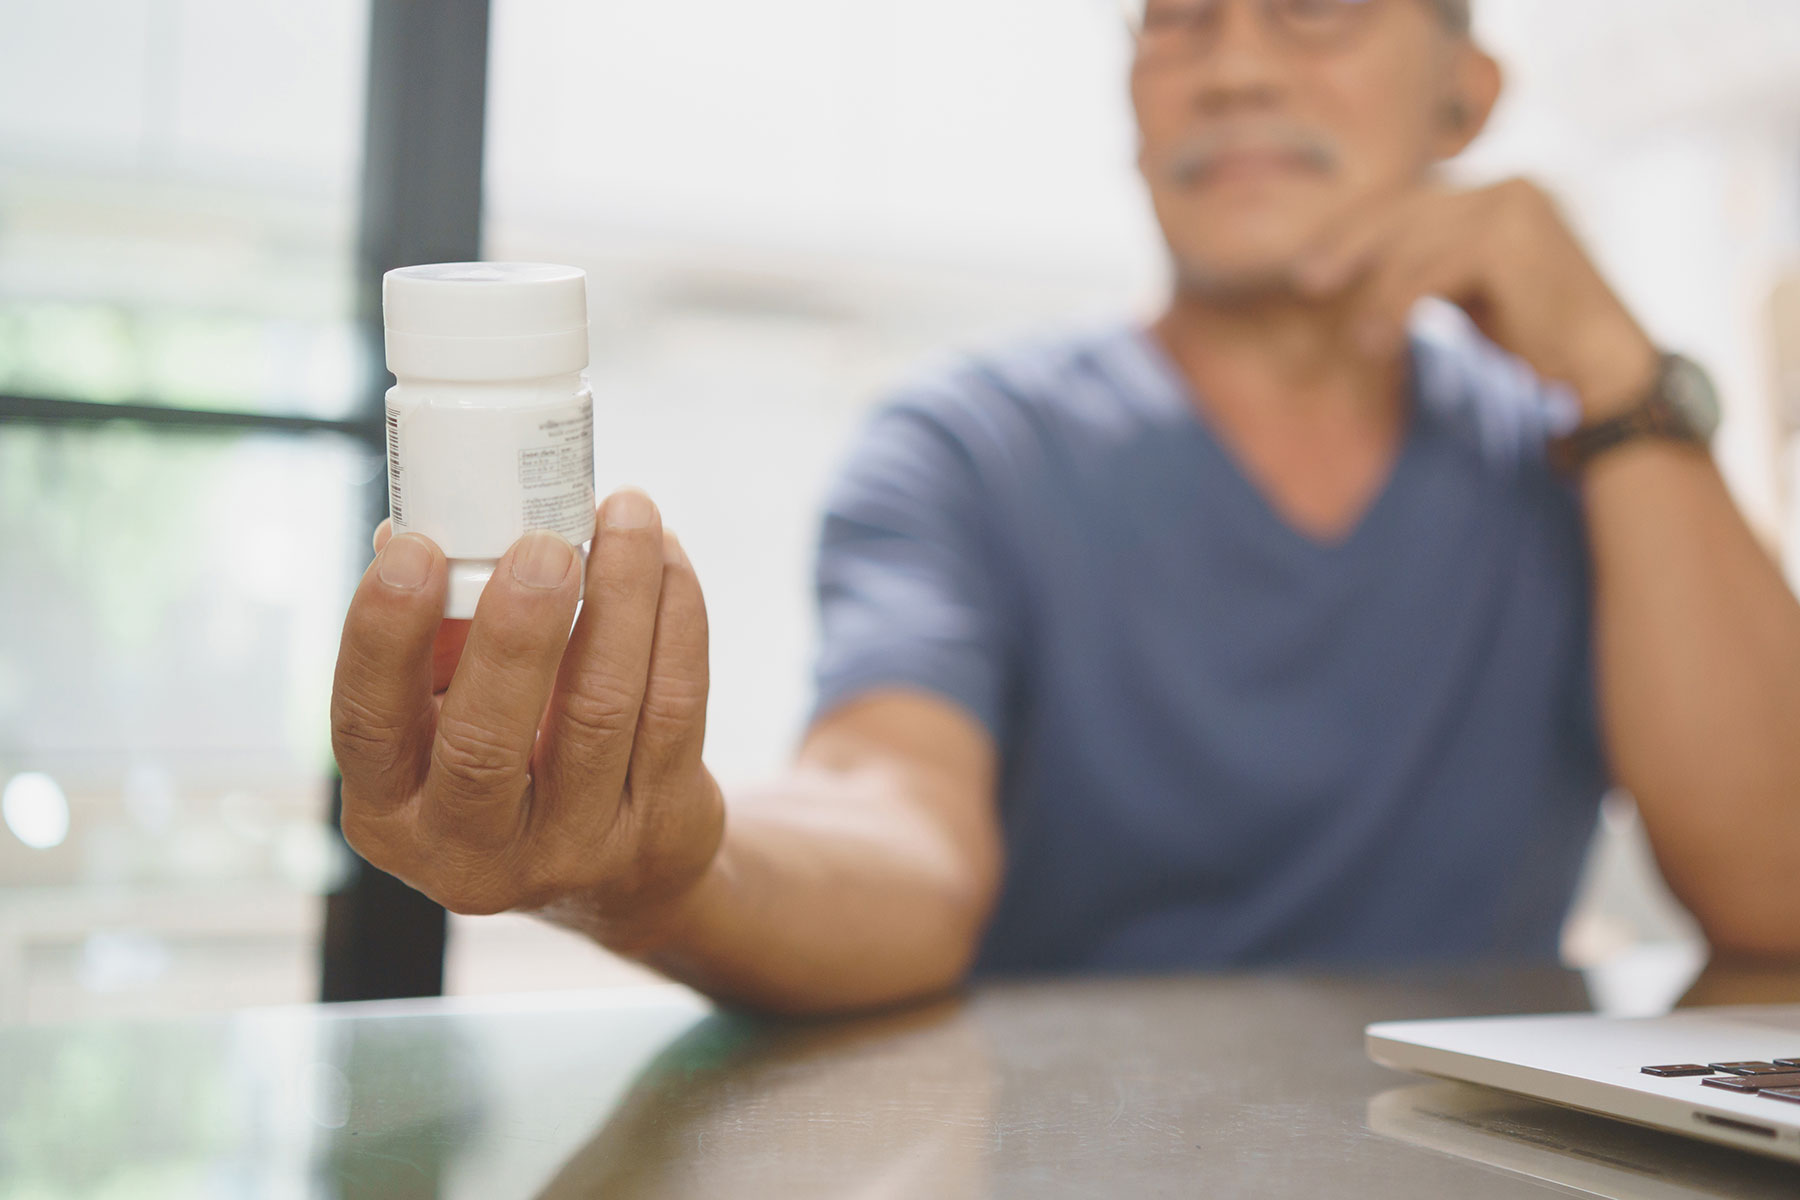 a person holds a bottle of prescription medication while wondering "what is medication management?"